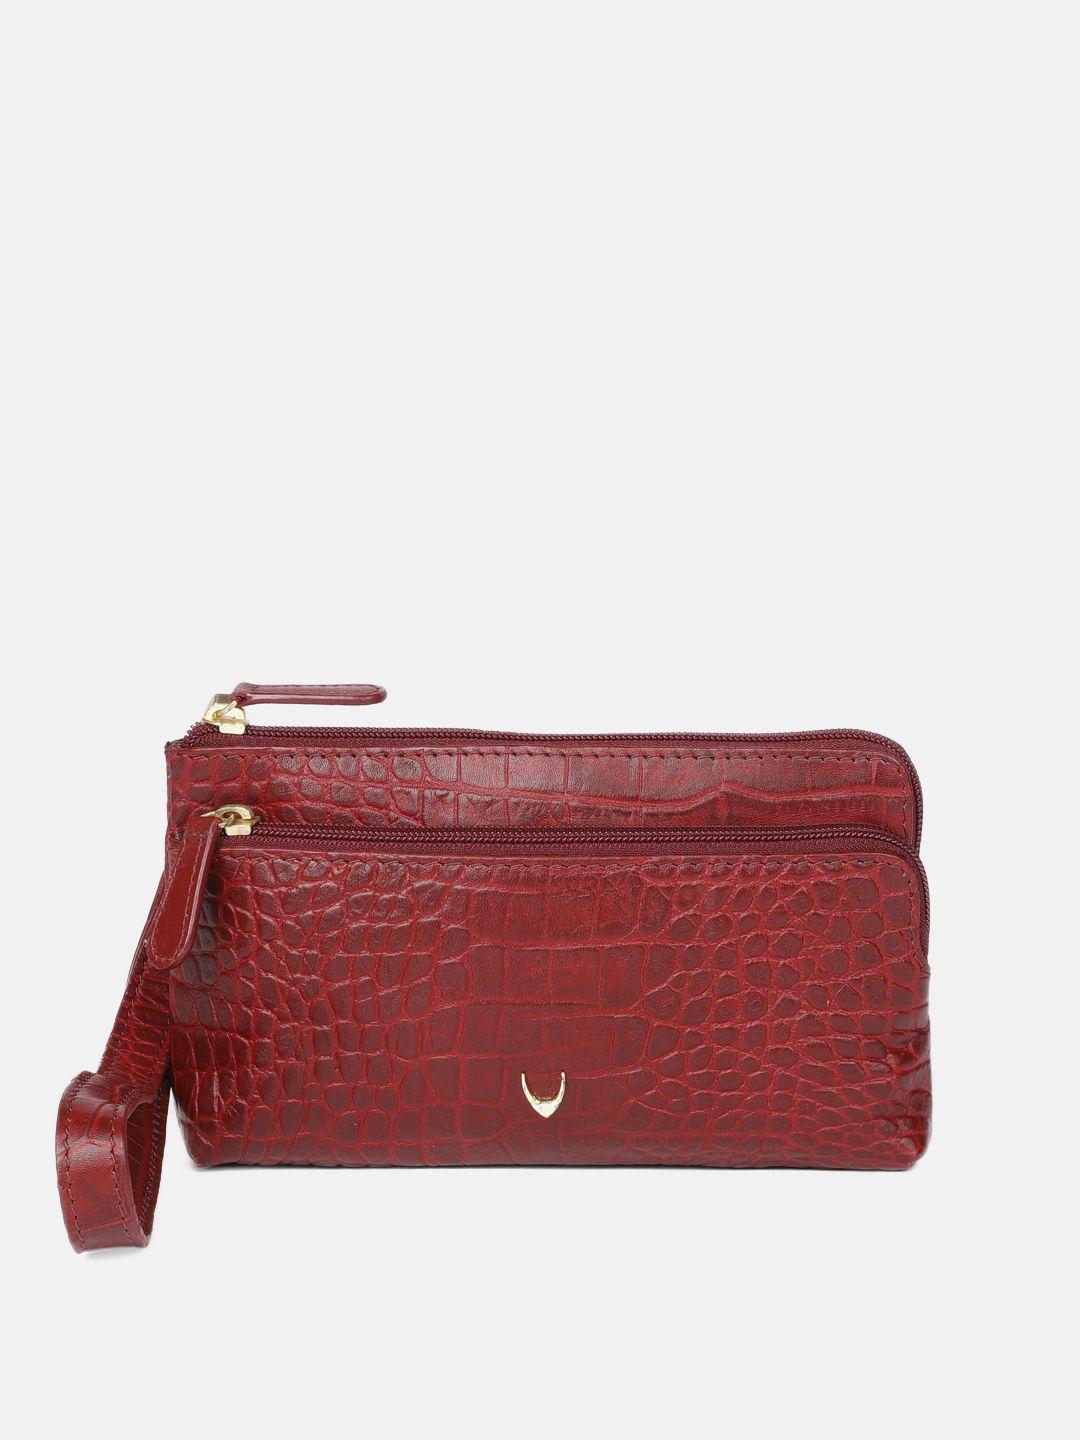 hidesign red textured leather purse